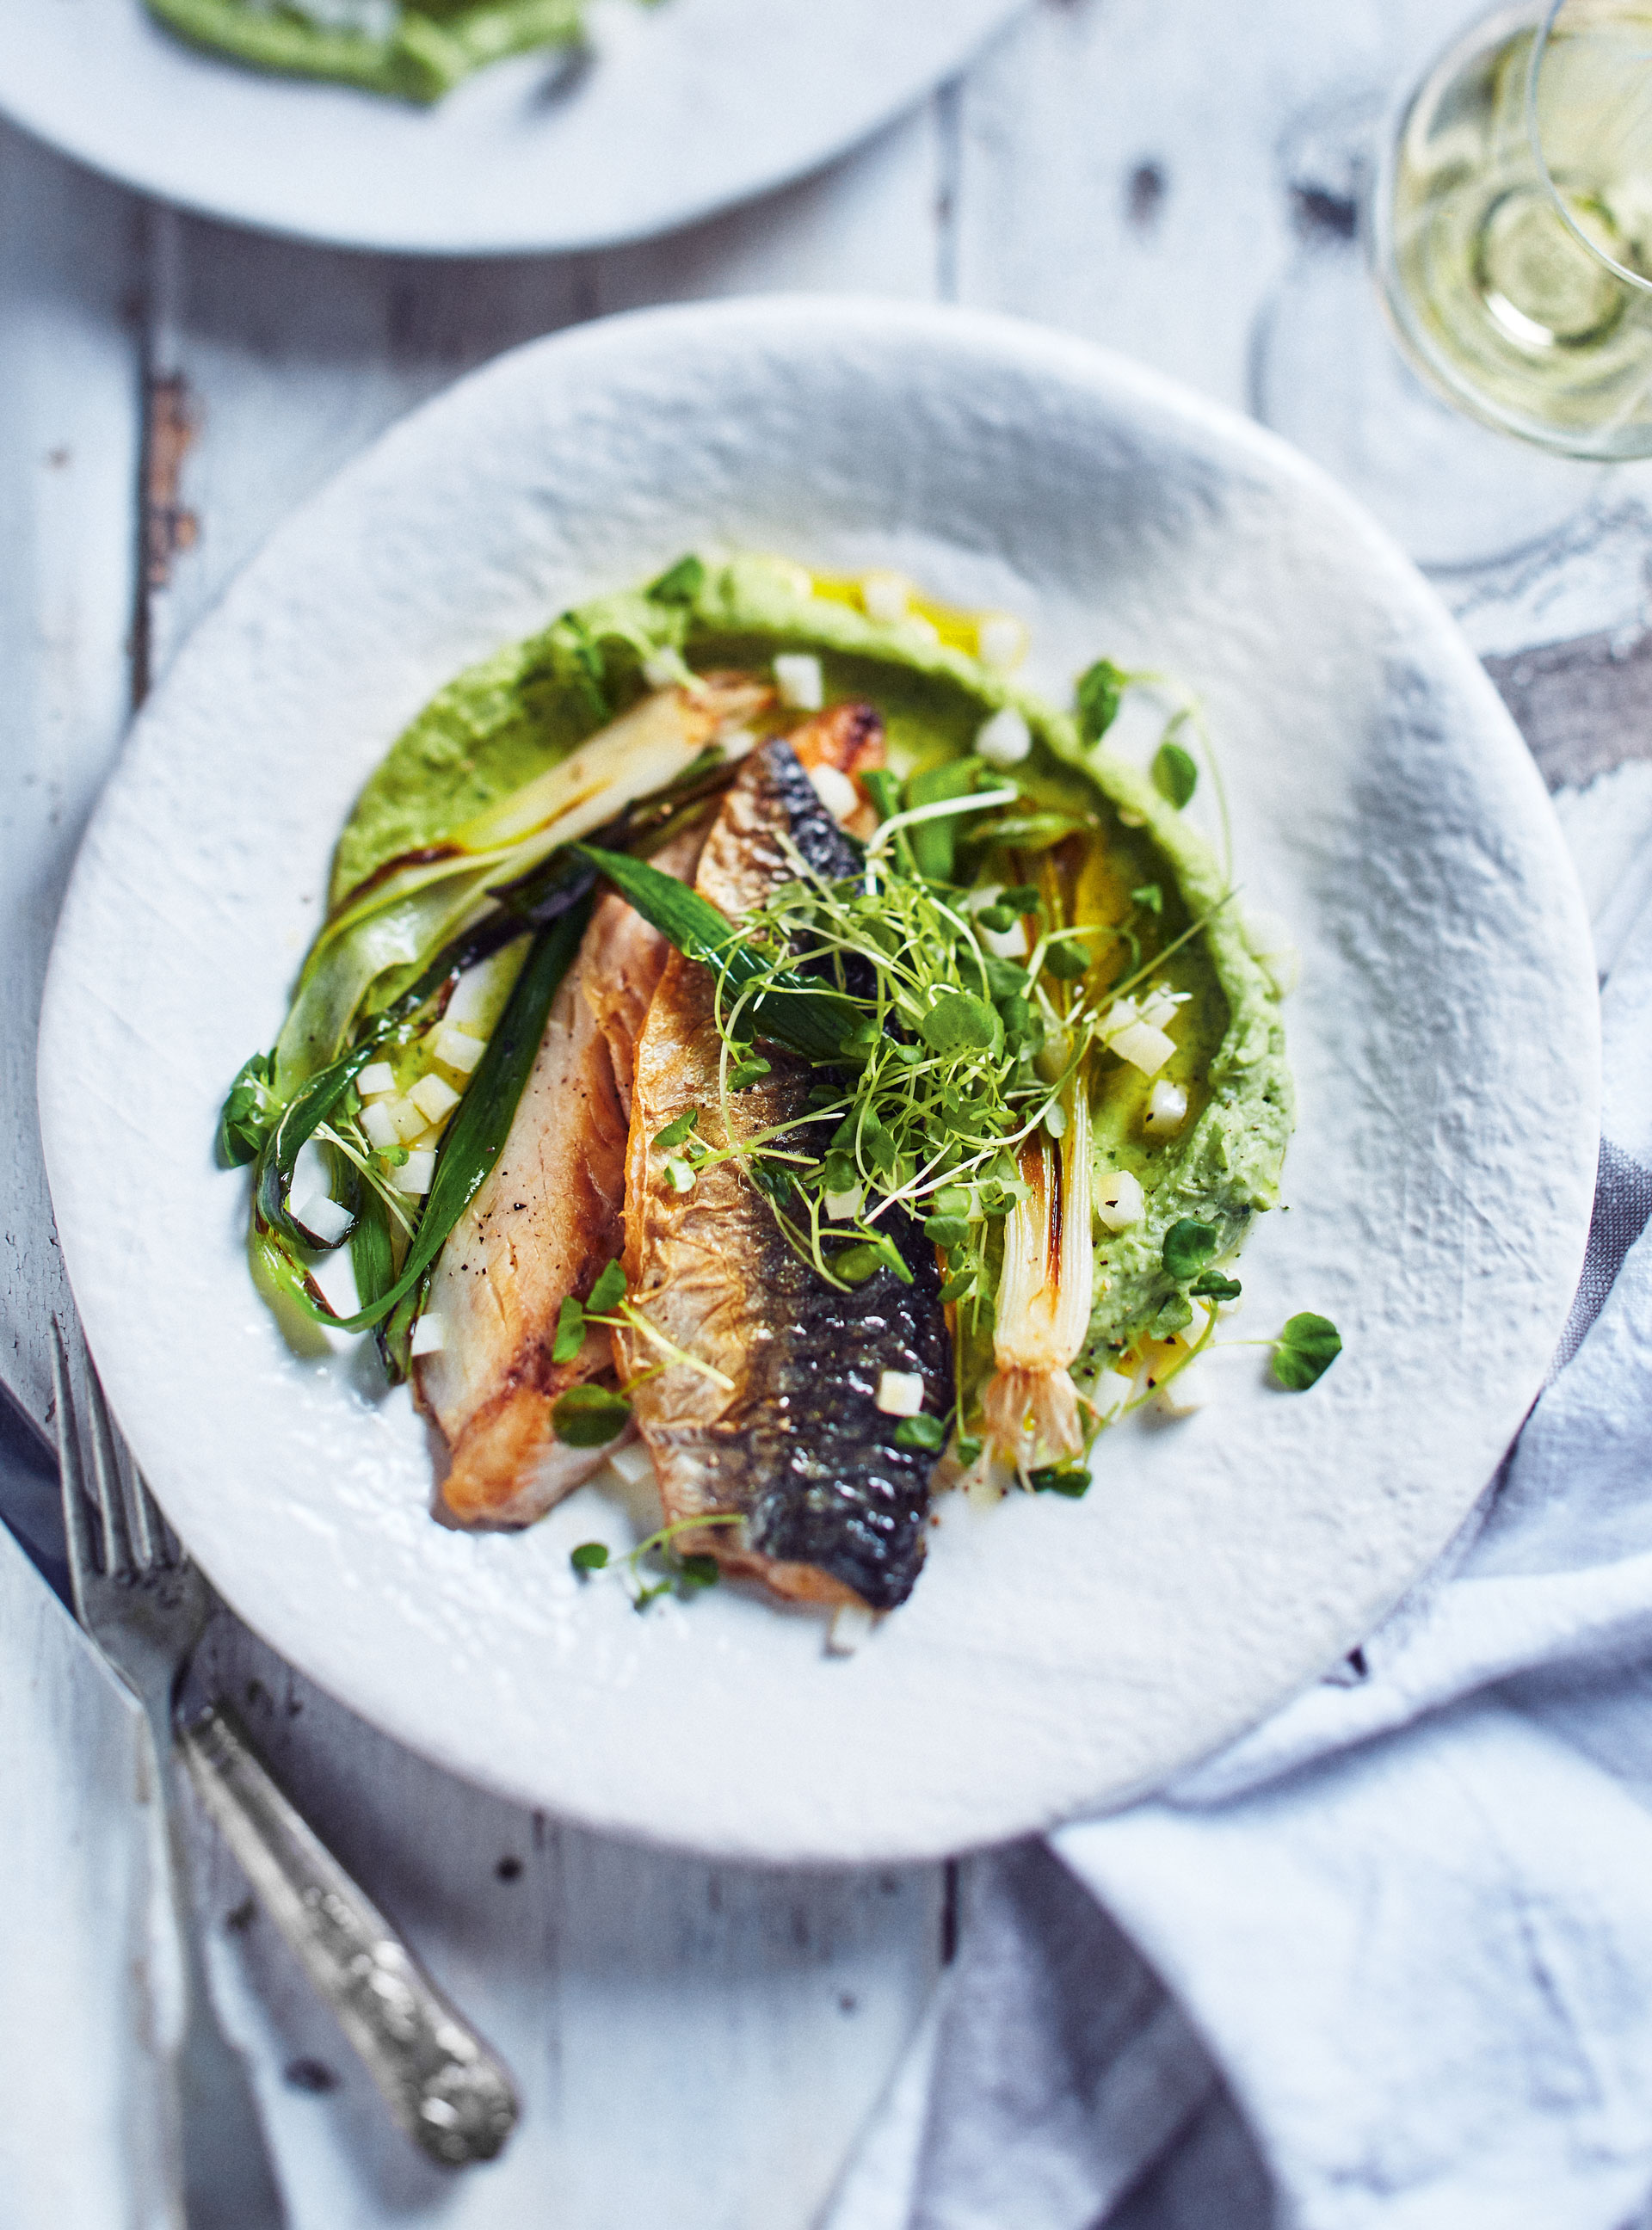 Seared Mackerel with Celeriac and Green Onion Purée